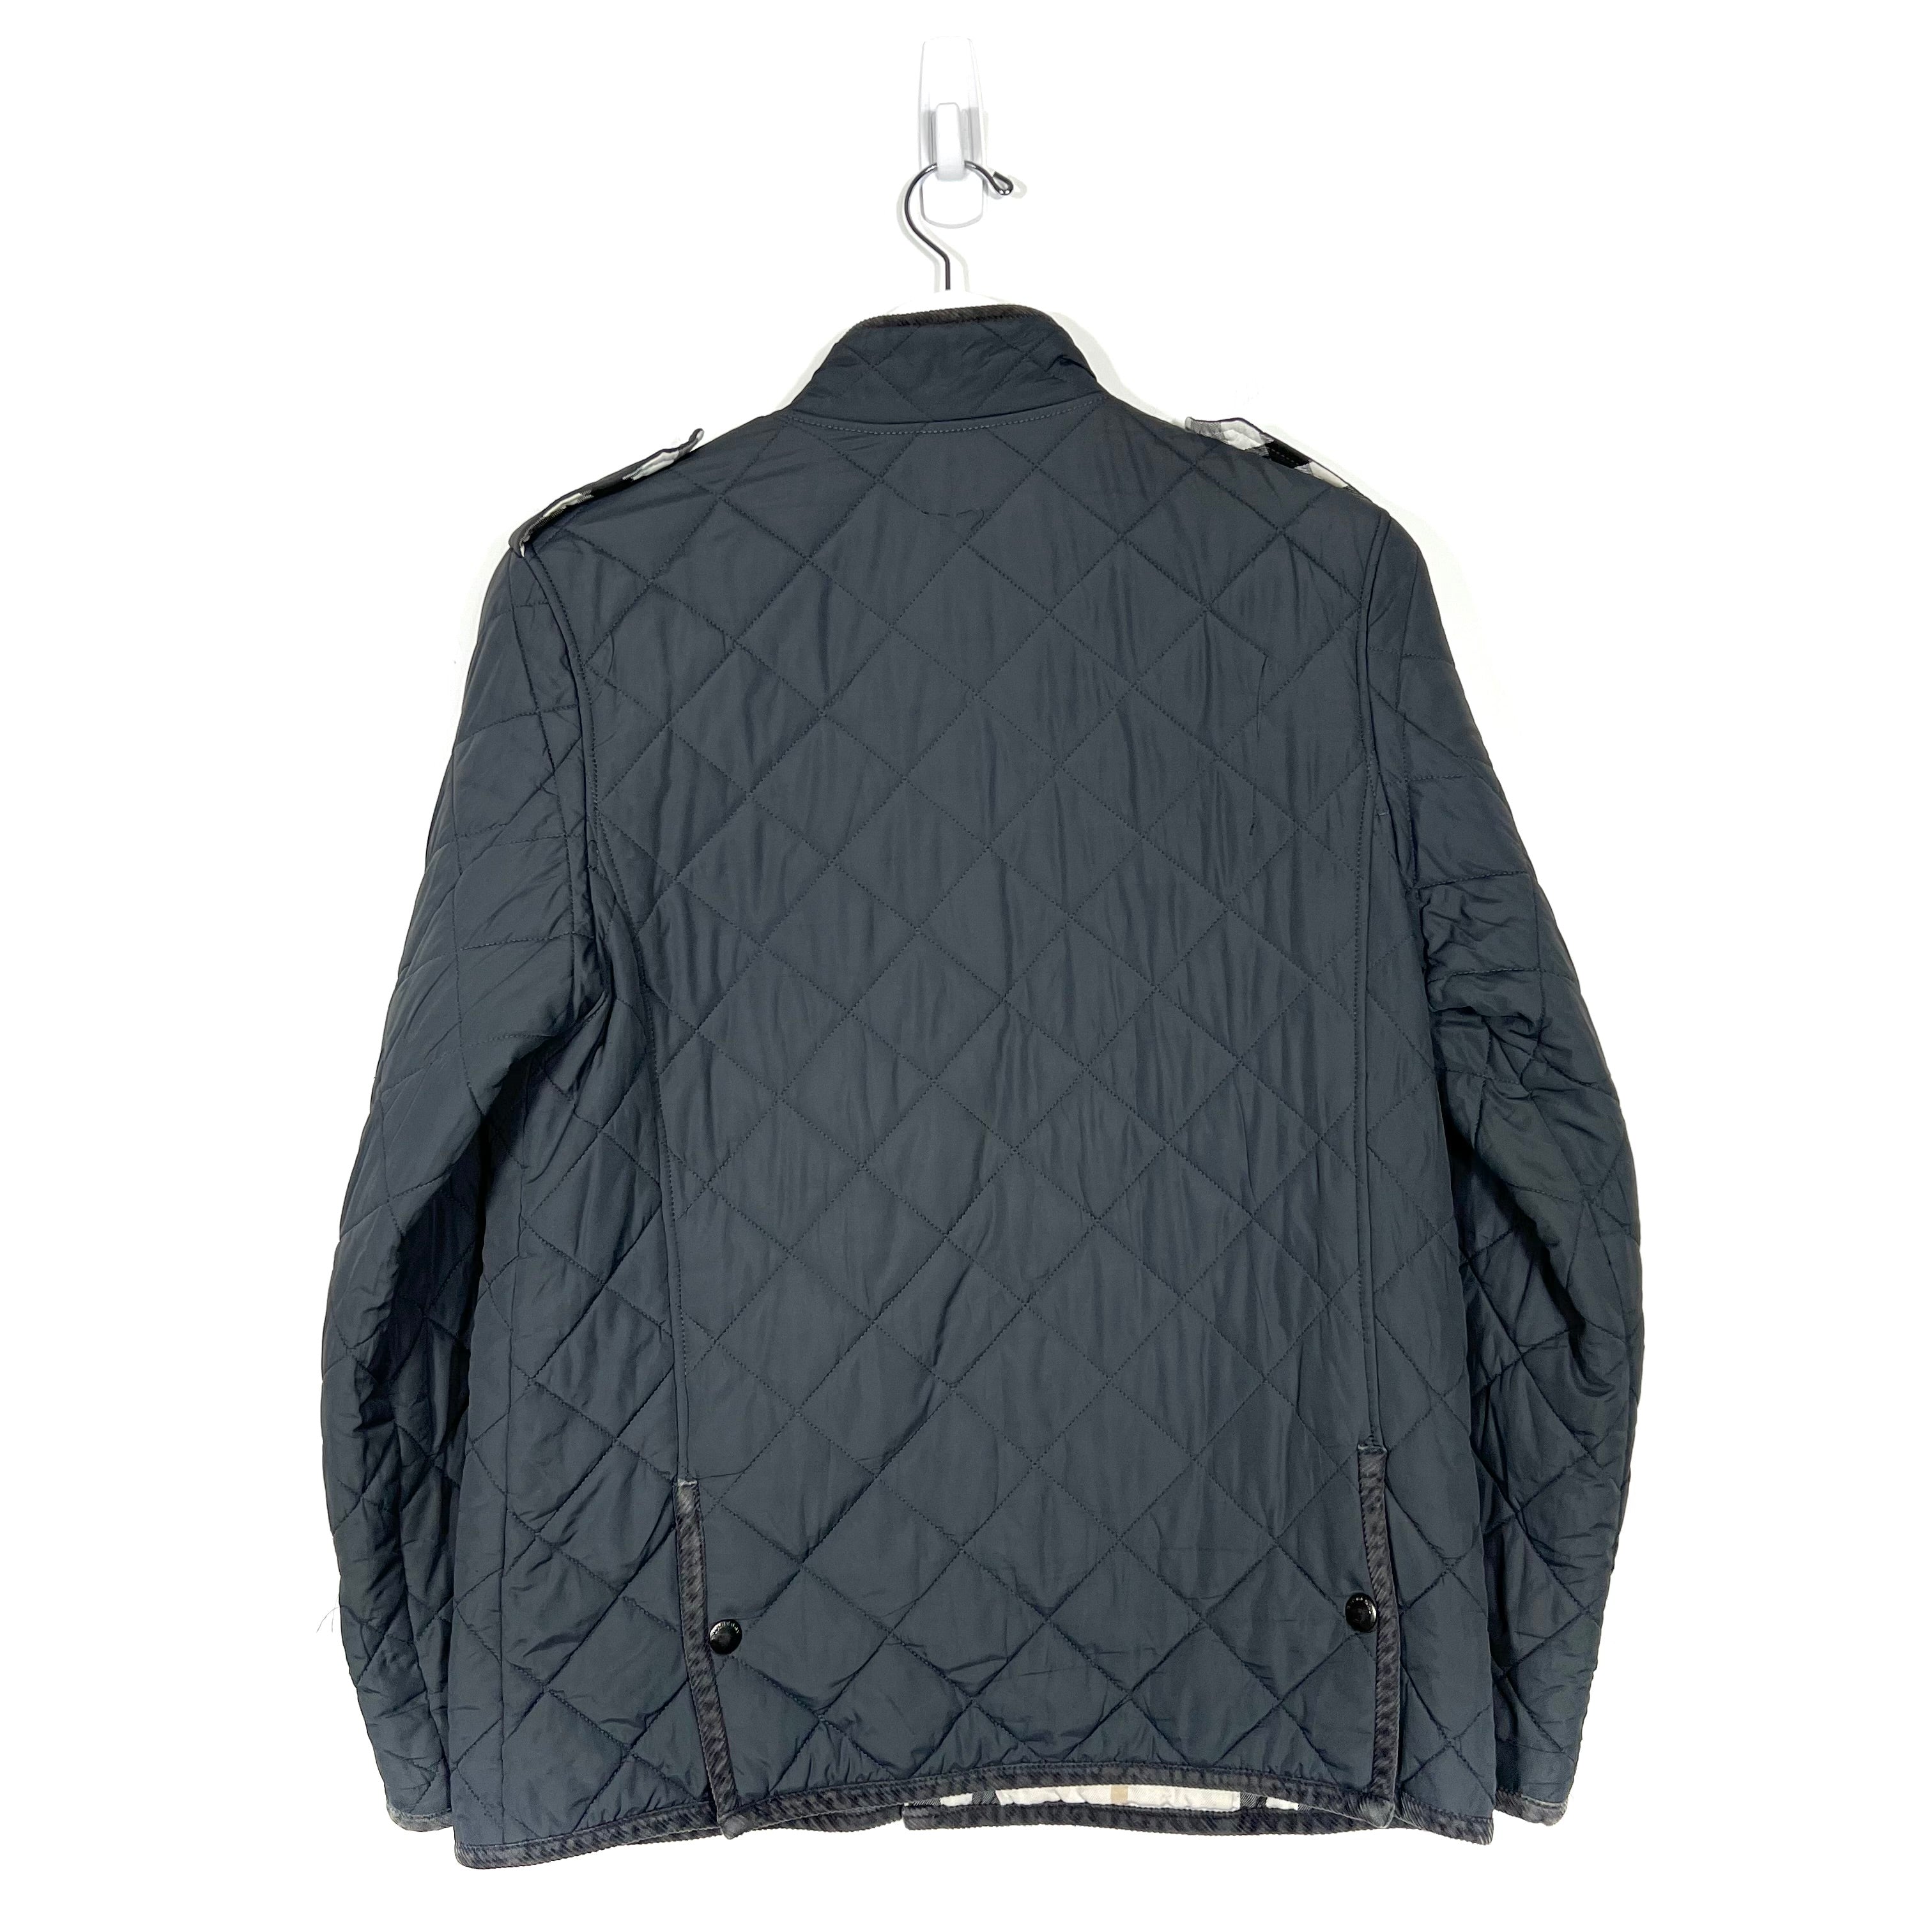 Burberry Quilted Jacket - Women's XS